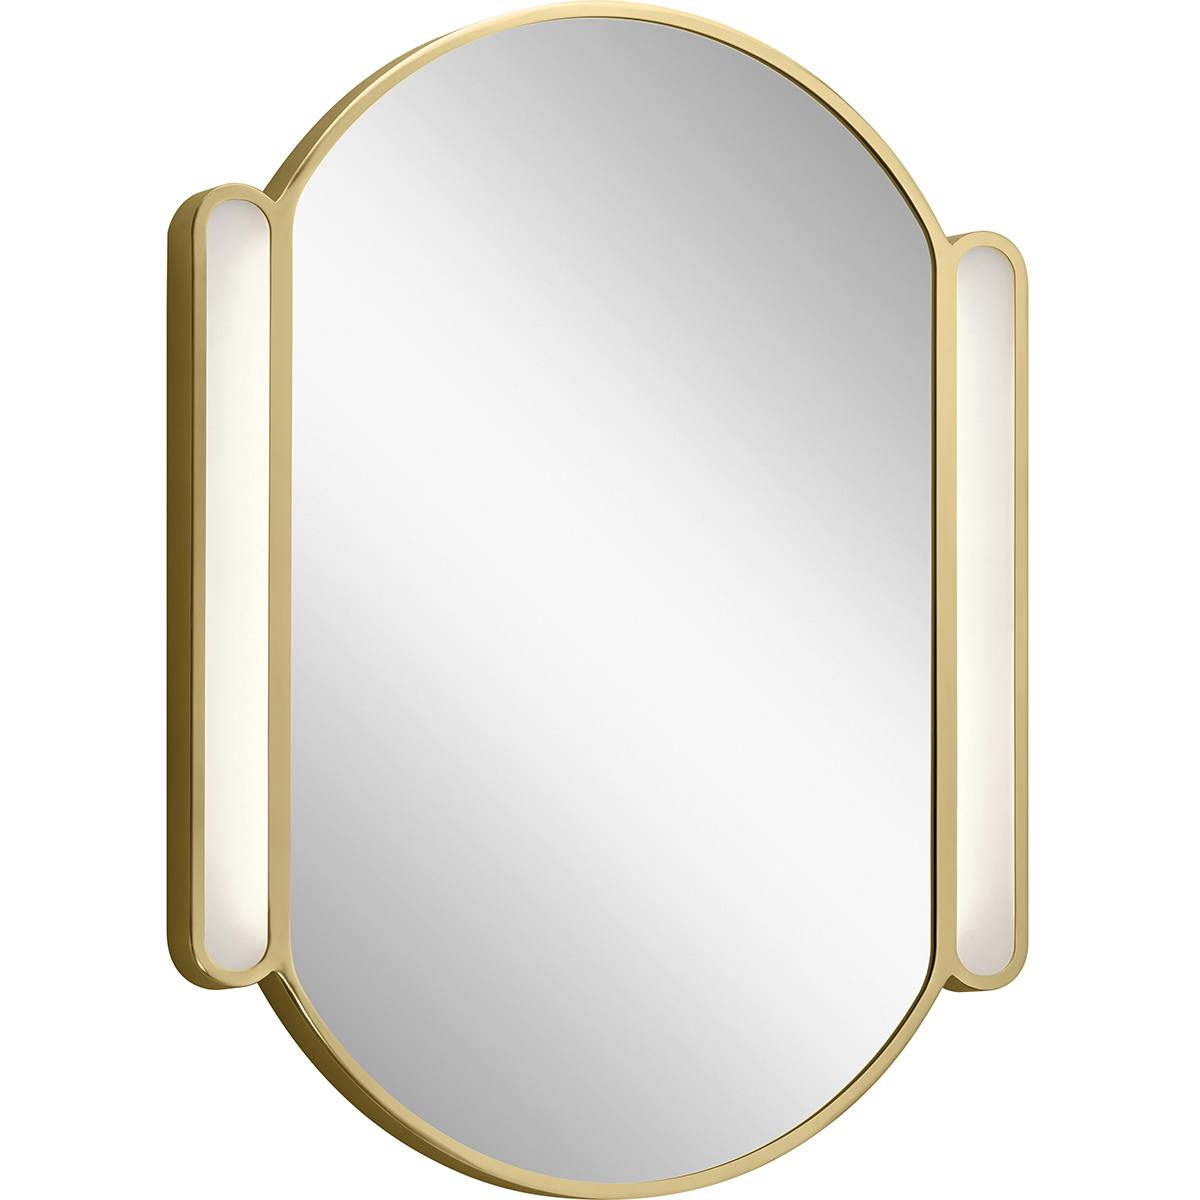 Phaelan 30" Oval Mirror Champagne Gold on a white background